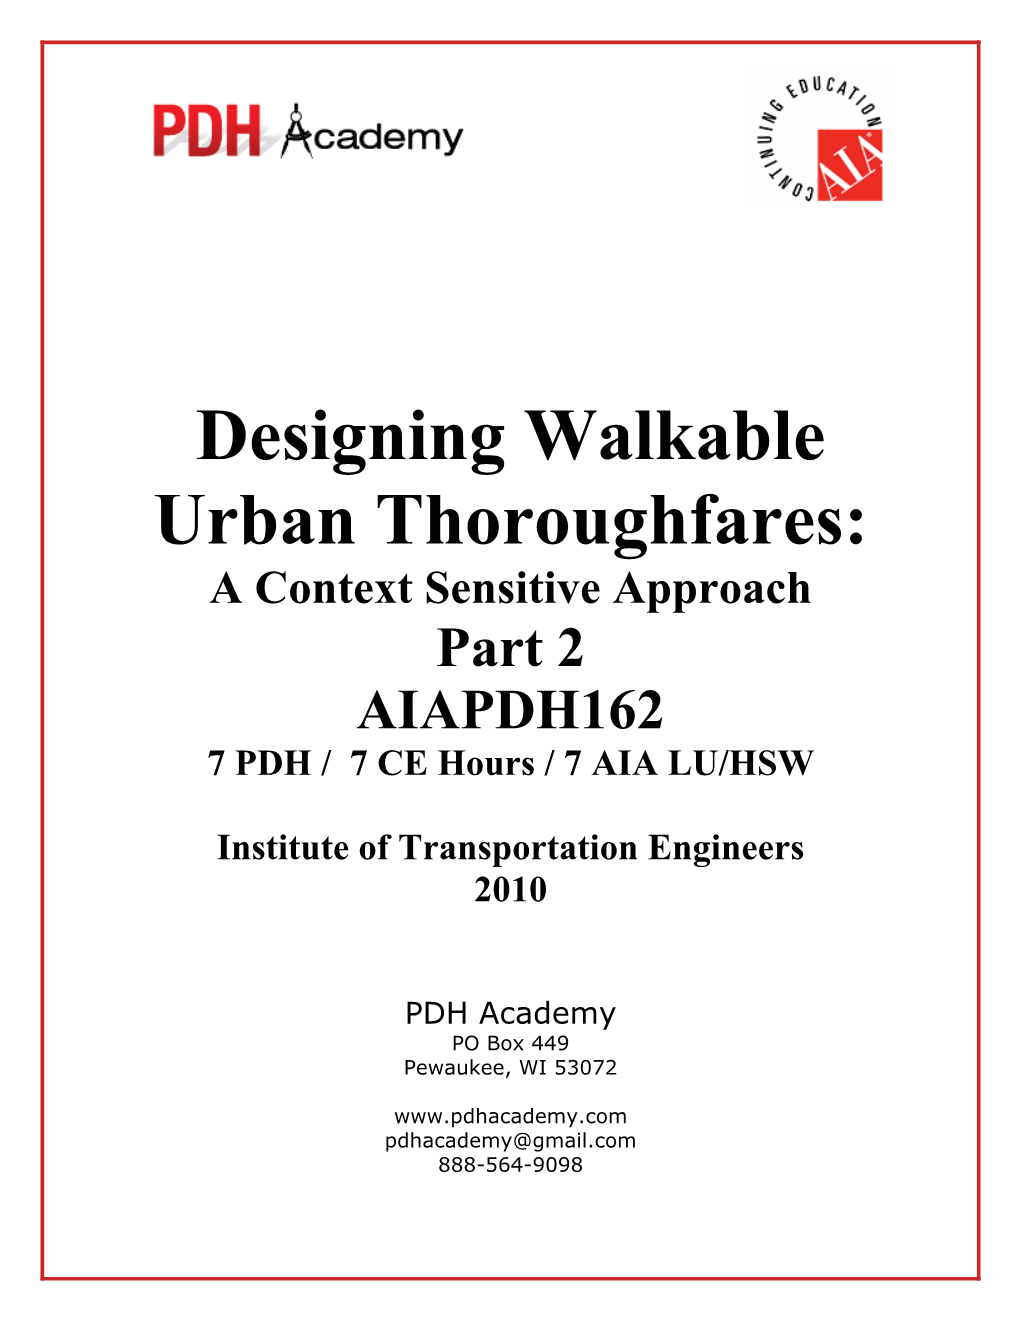 Designing Walkable Urban Thoroughfares: a Context Sensitive Approach Part 2 AIAPDH162 7PDH/ 7CE Hours/7AIAL U/HSW